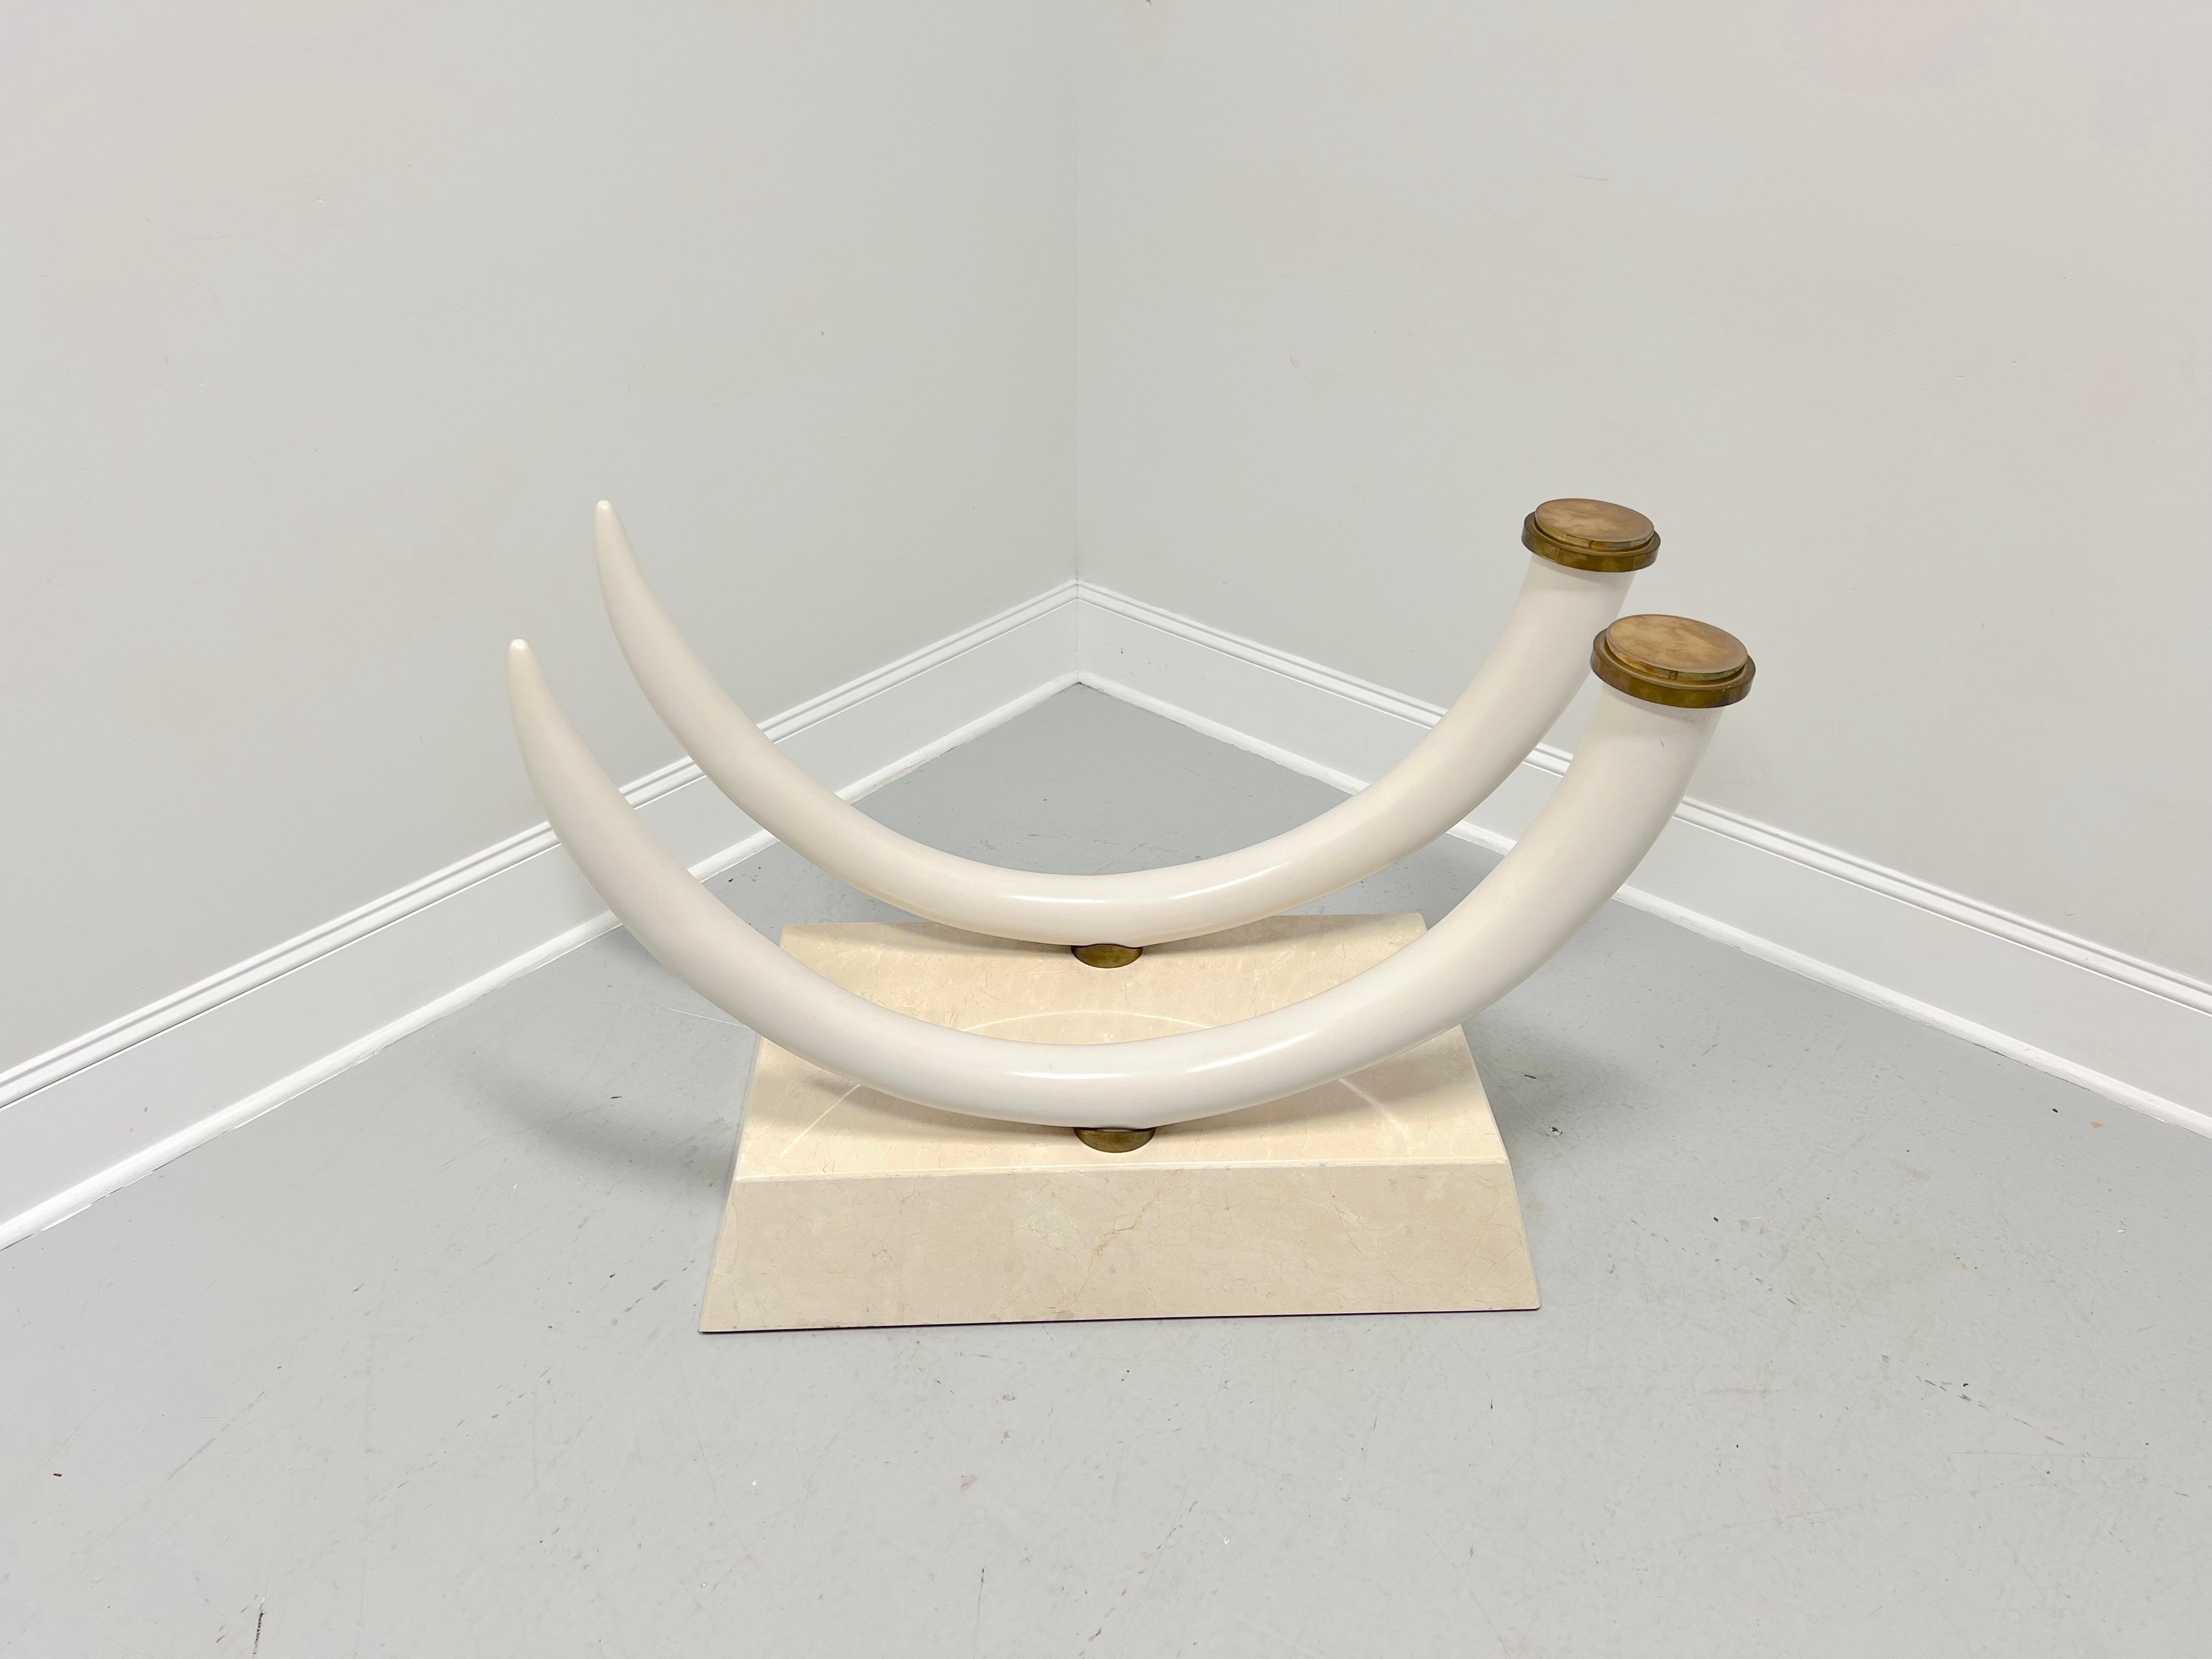 A Contemporary style dining table pedestal base, unbranded. Solid travertine base in a rectangular shape supporting composite faux elephant tusks with decorative brass disks at base of tusks and brass accents where tusks meet the base. Ready for